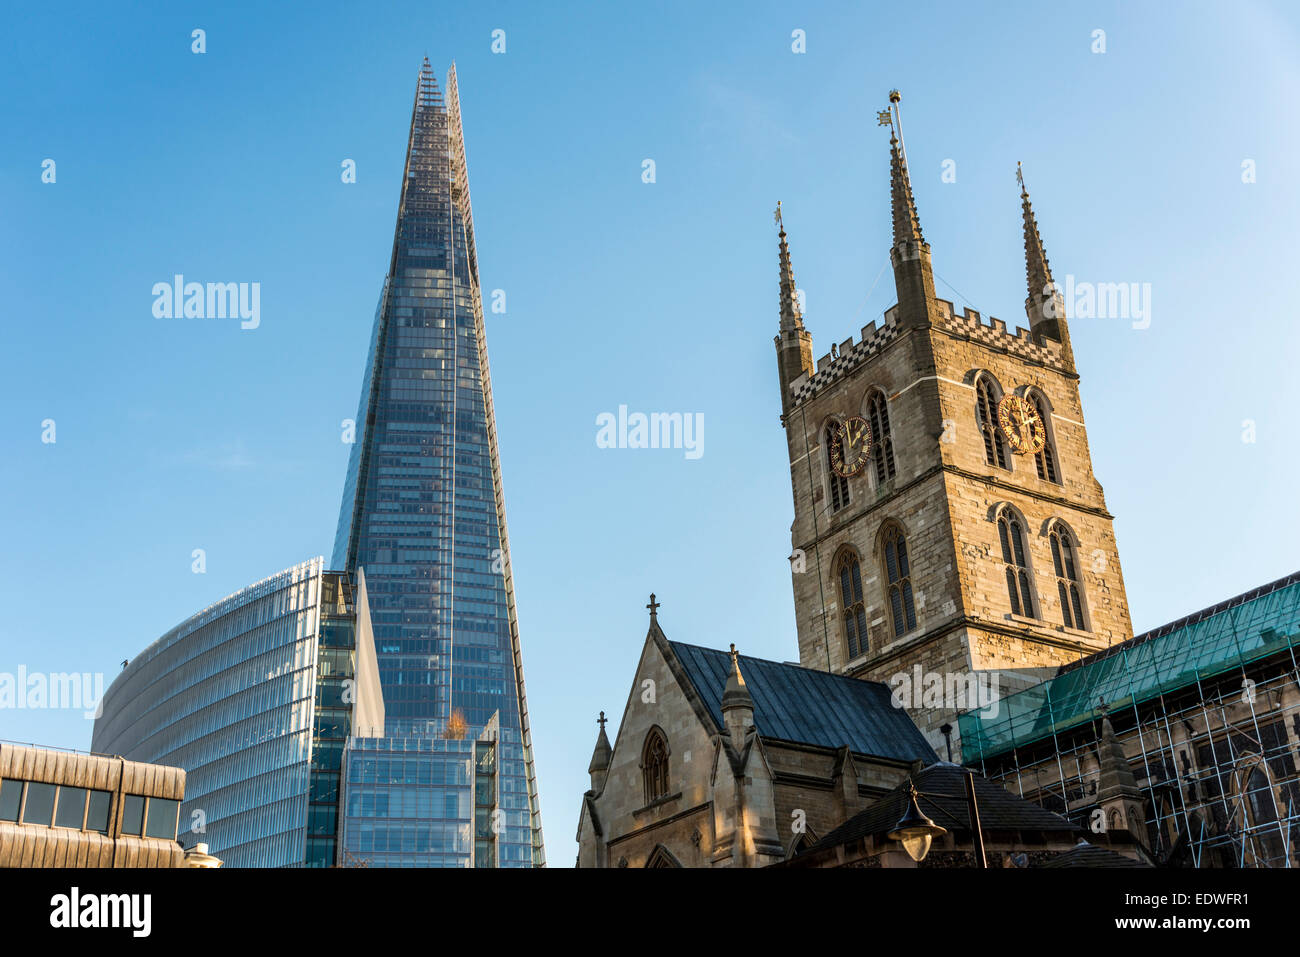 The tower of Southwark Cathedral and the modern skyscraper The Shard in London Stock Photo